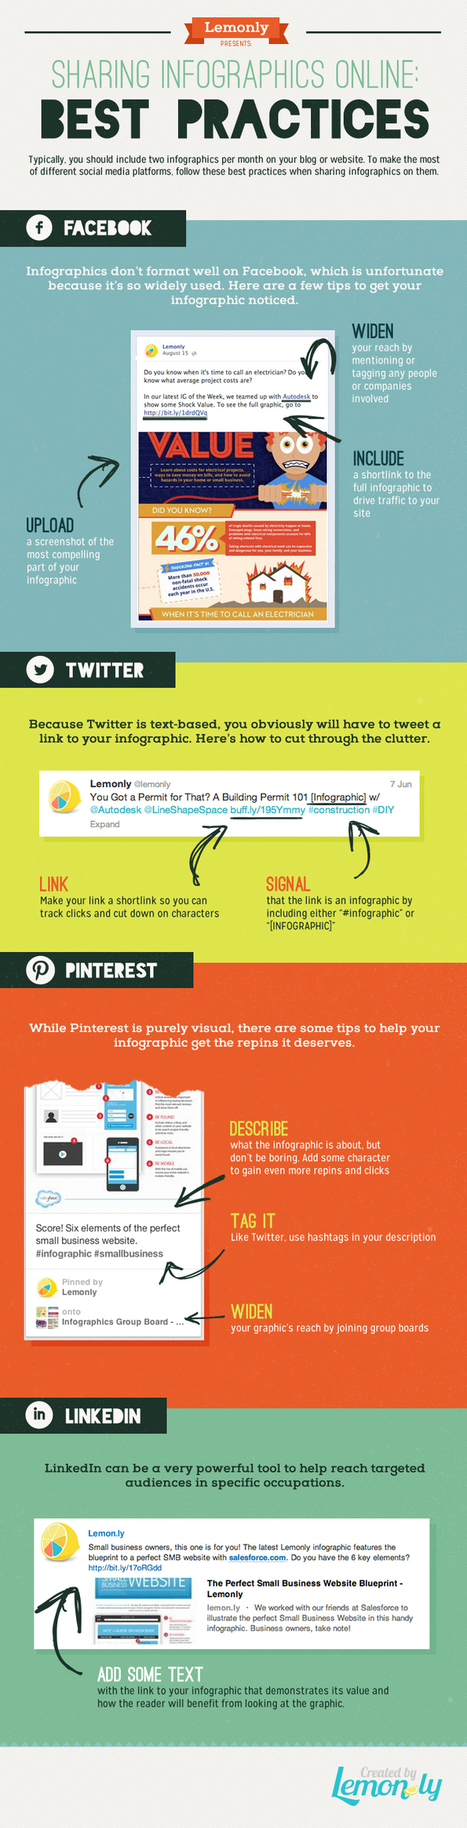 How to Share Infographics on Social Media - Best Practices [Infographic] | BI Revolution | Scoop.it